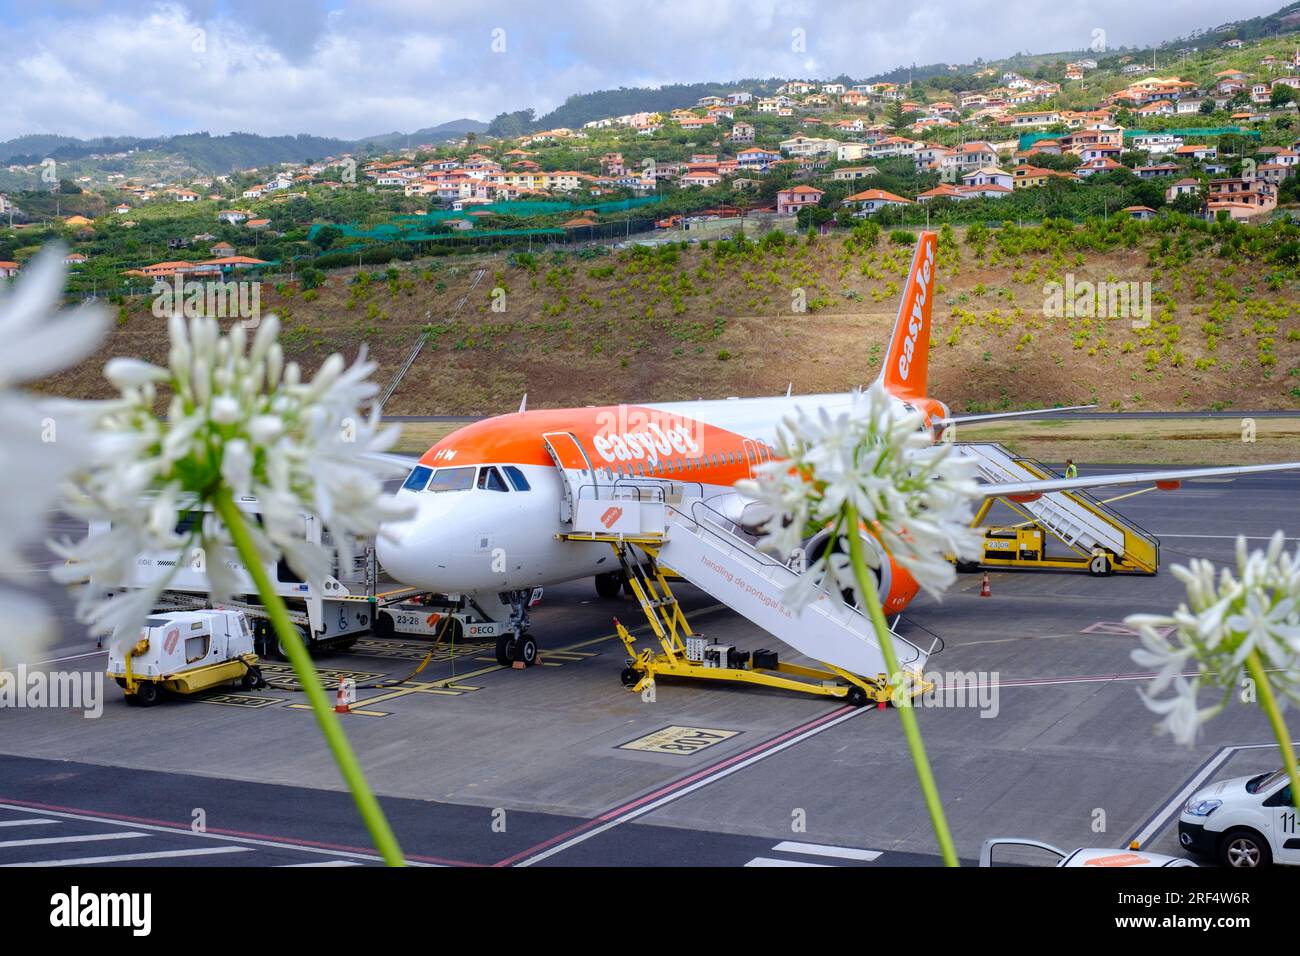 Air travel, Easyjet Airbus A320-251N ready for boarding at the tarmac, Madeira Island Airport, Portugal Stock Photo